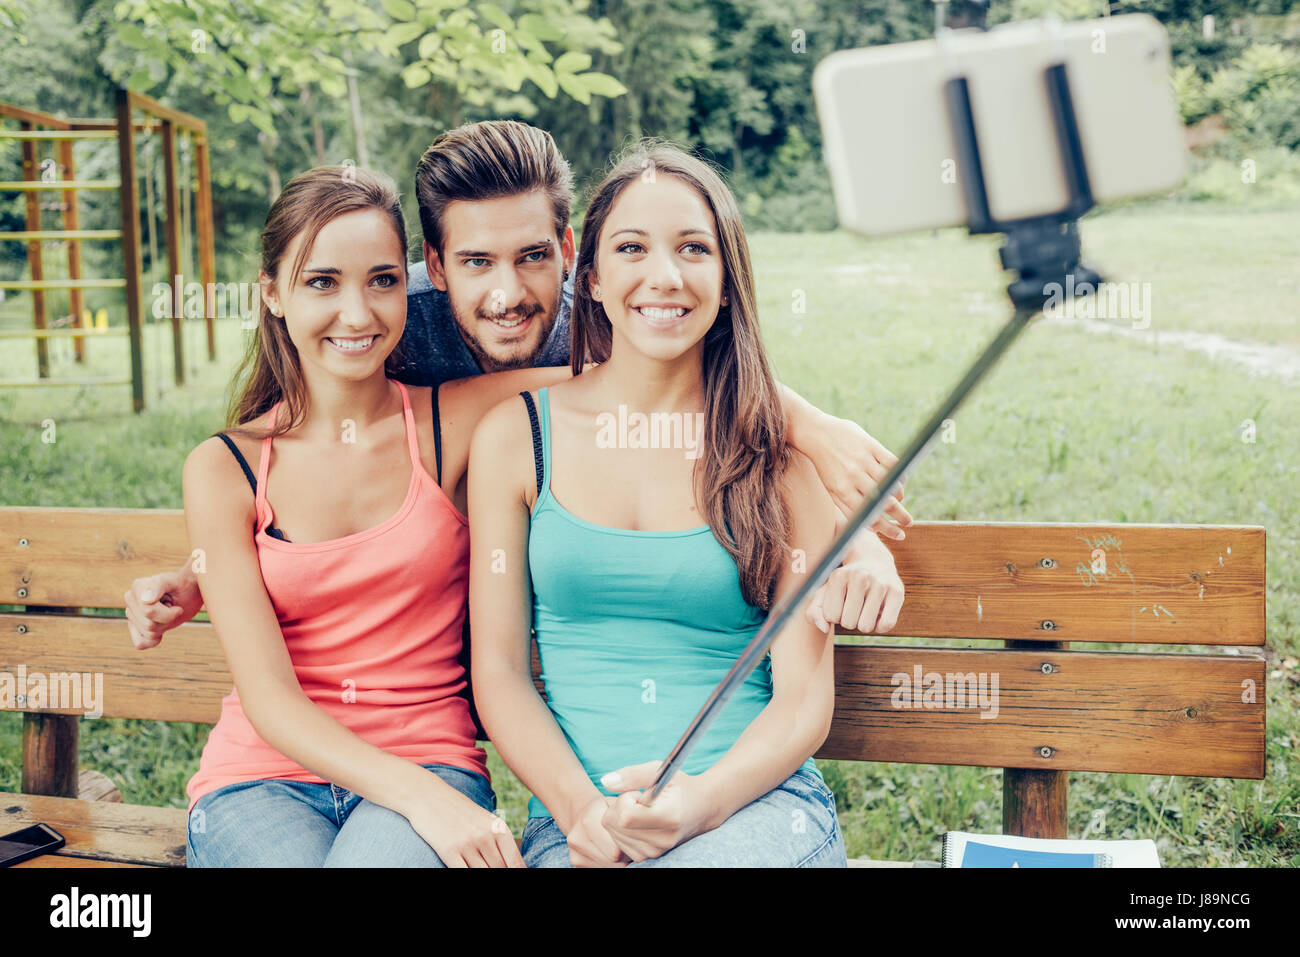 Cheerful smiling teenagers relaxing at the park and taking selfies using a selfie stick Stock Photo